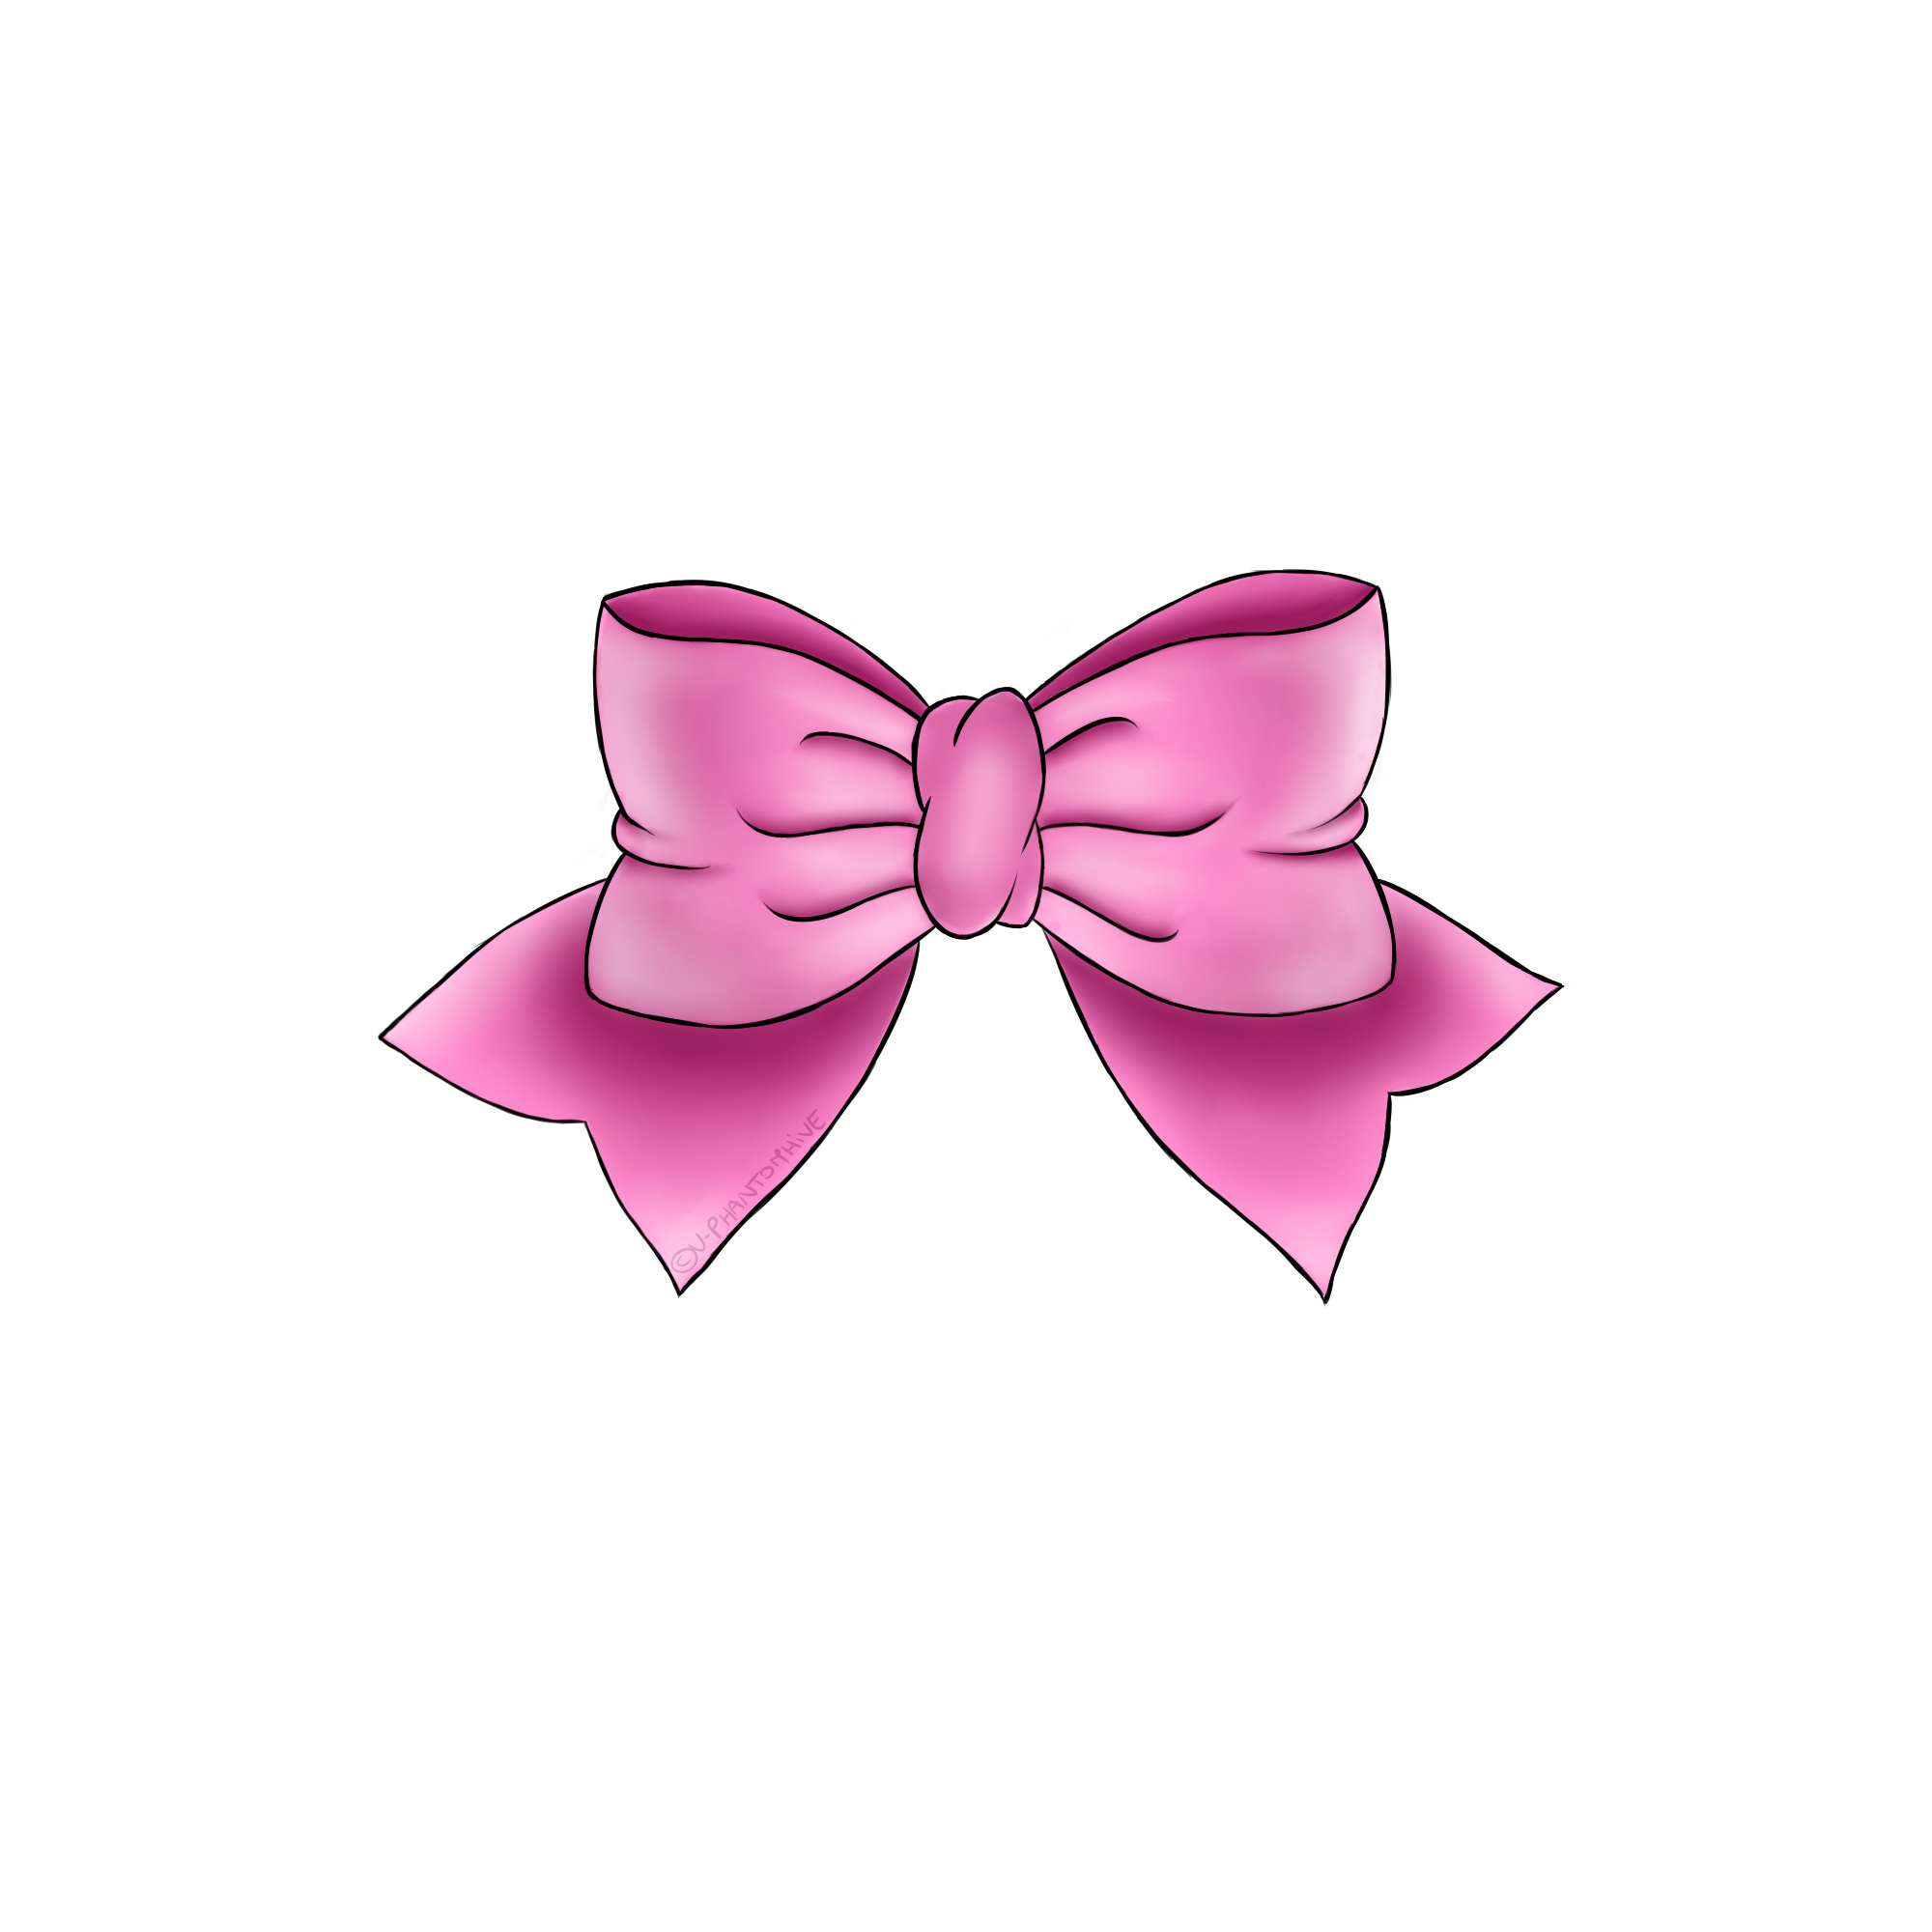 Pink bow by V-Phantomhive on DeviantArt